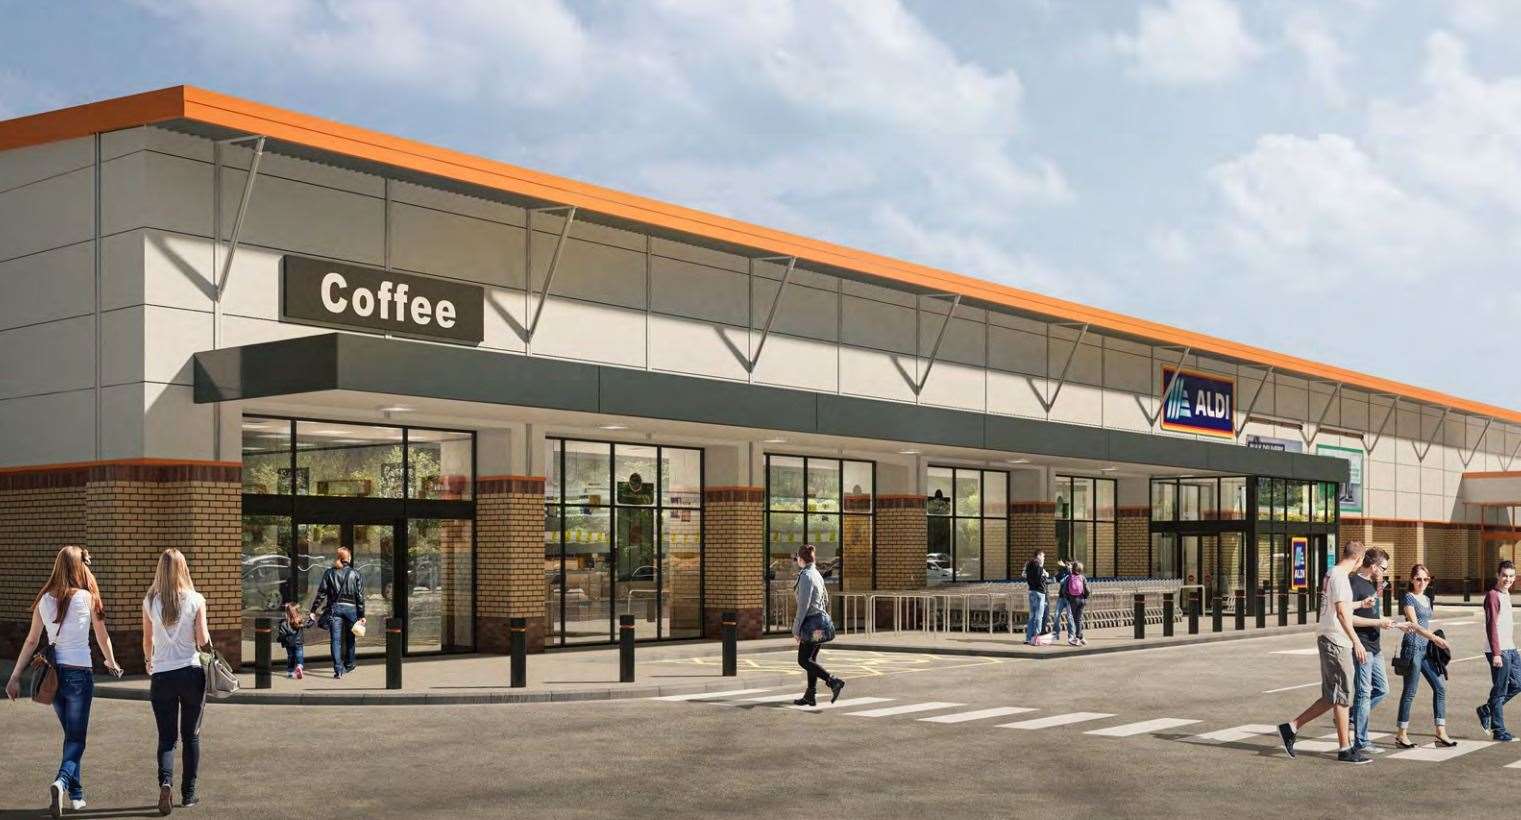 A CGI showing where the coffee shop and Aldi will take up residence